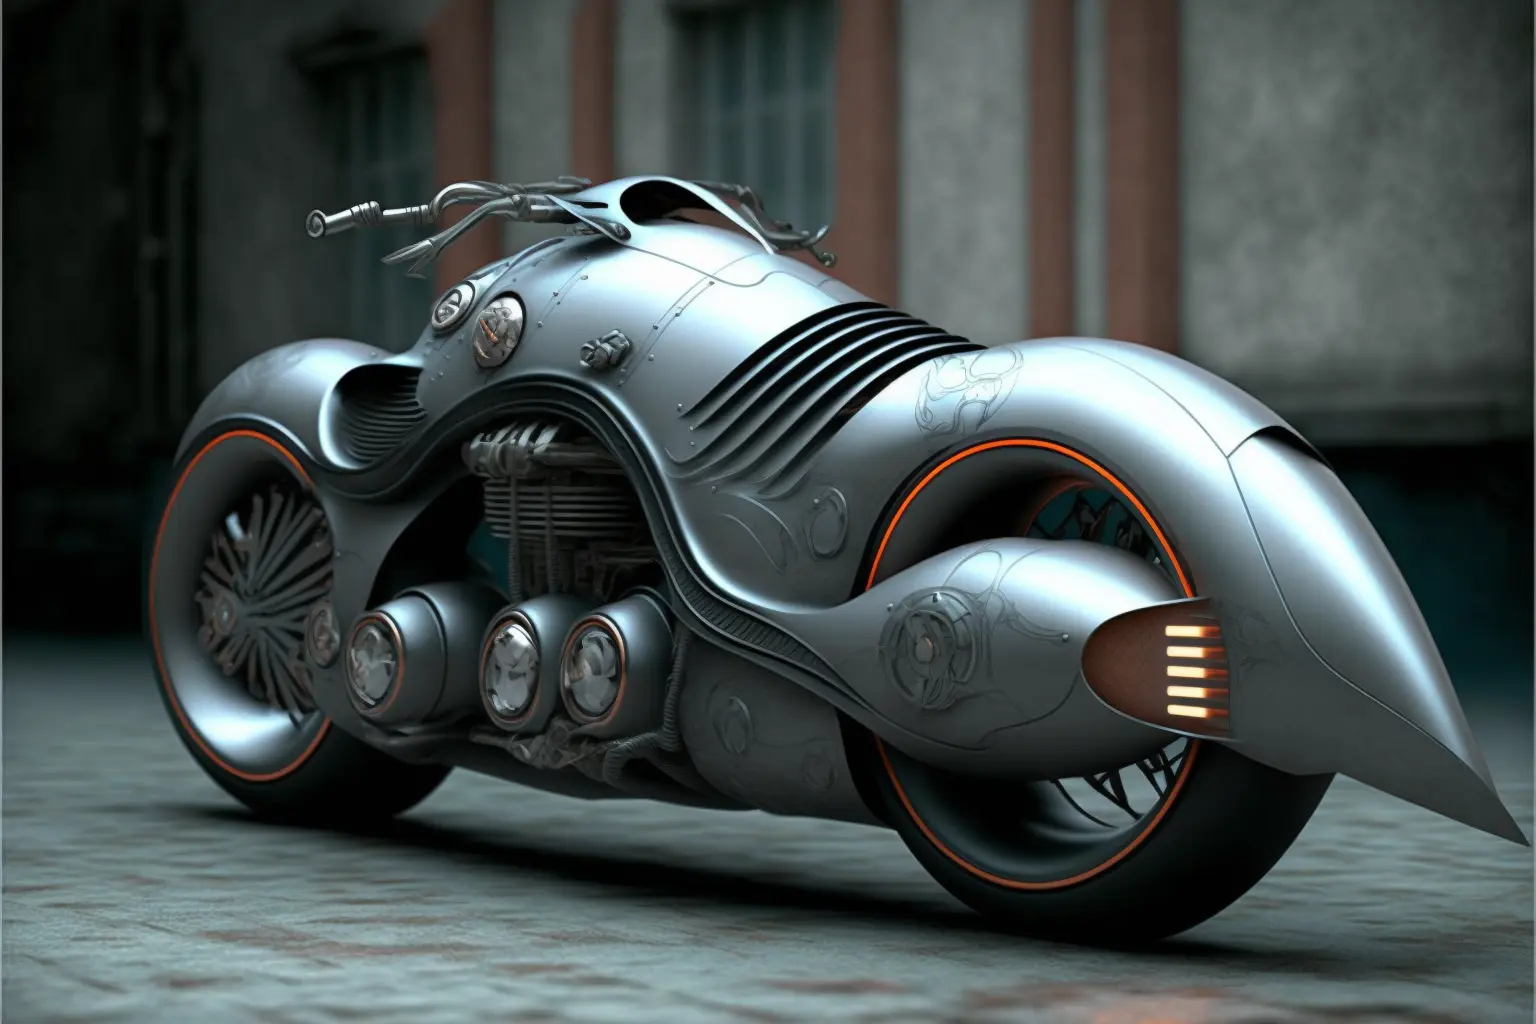 futuristic motorcycle concept inspired by classic harley